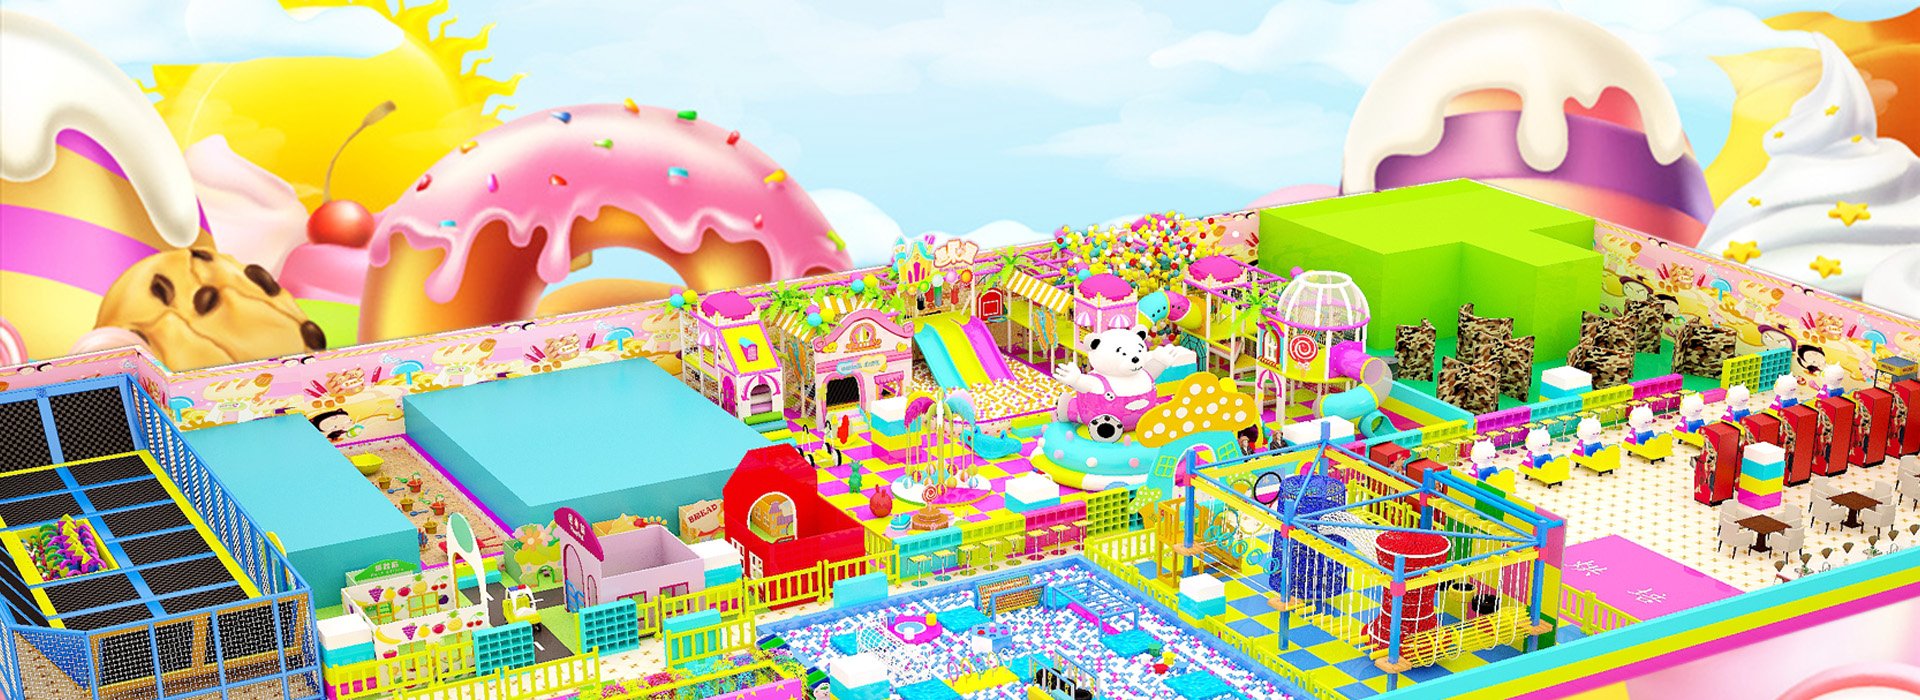 Candy Themed Soft Indoor Playground